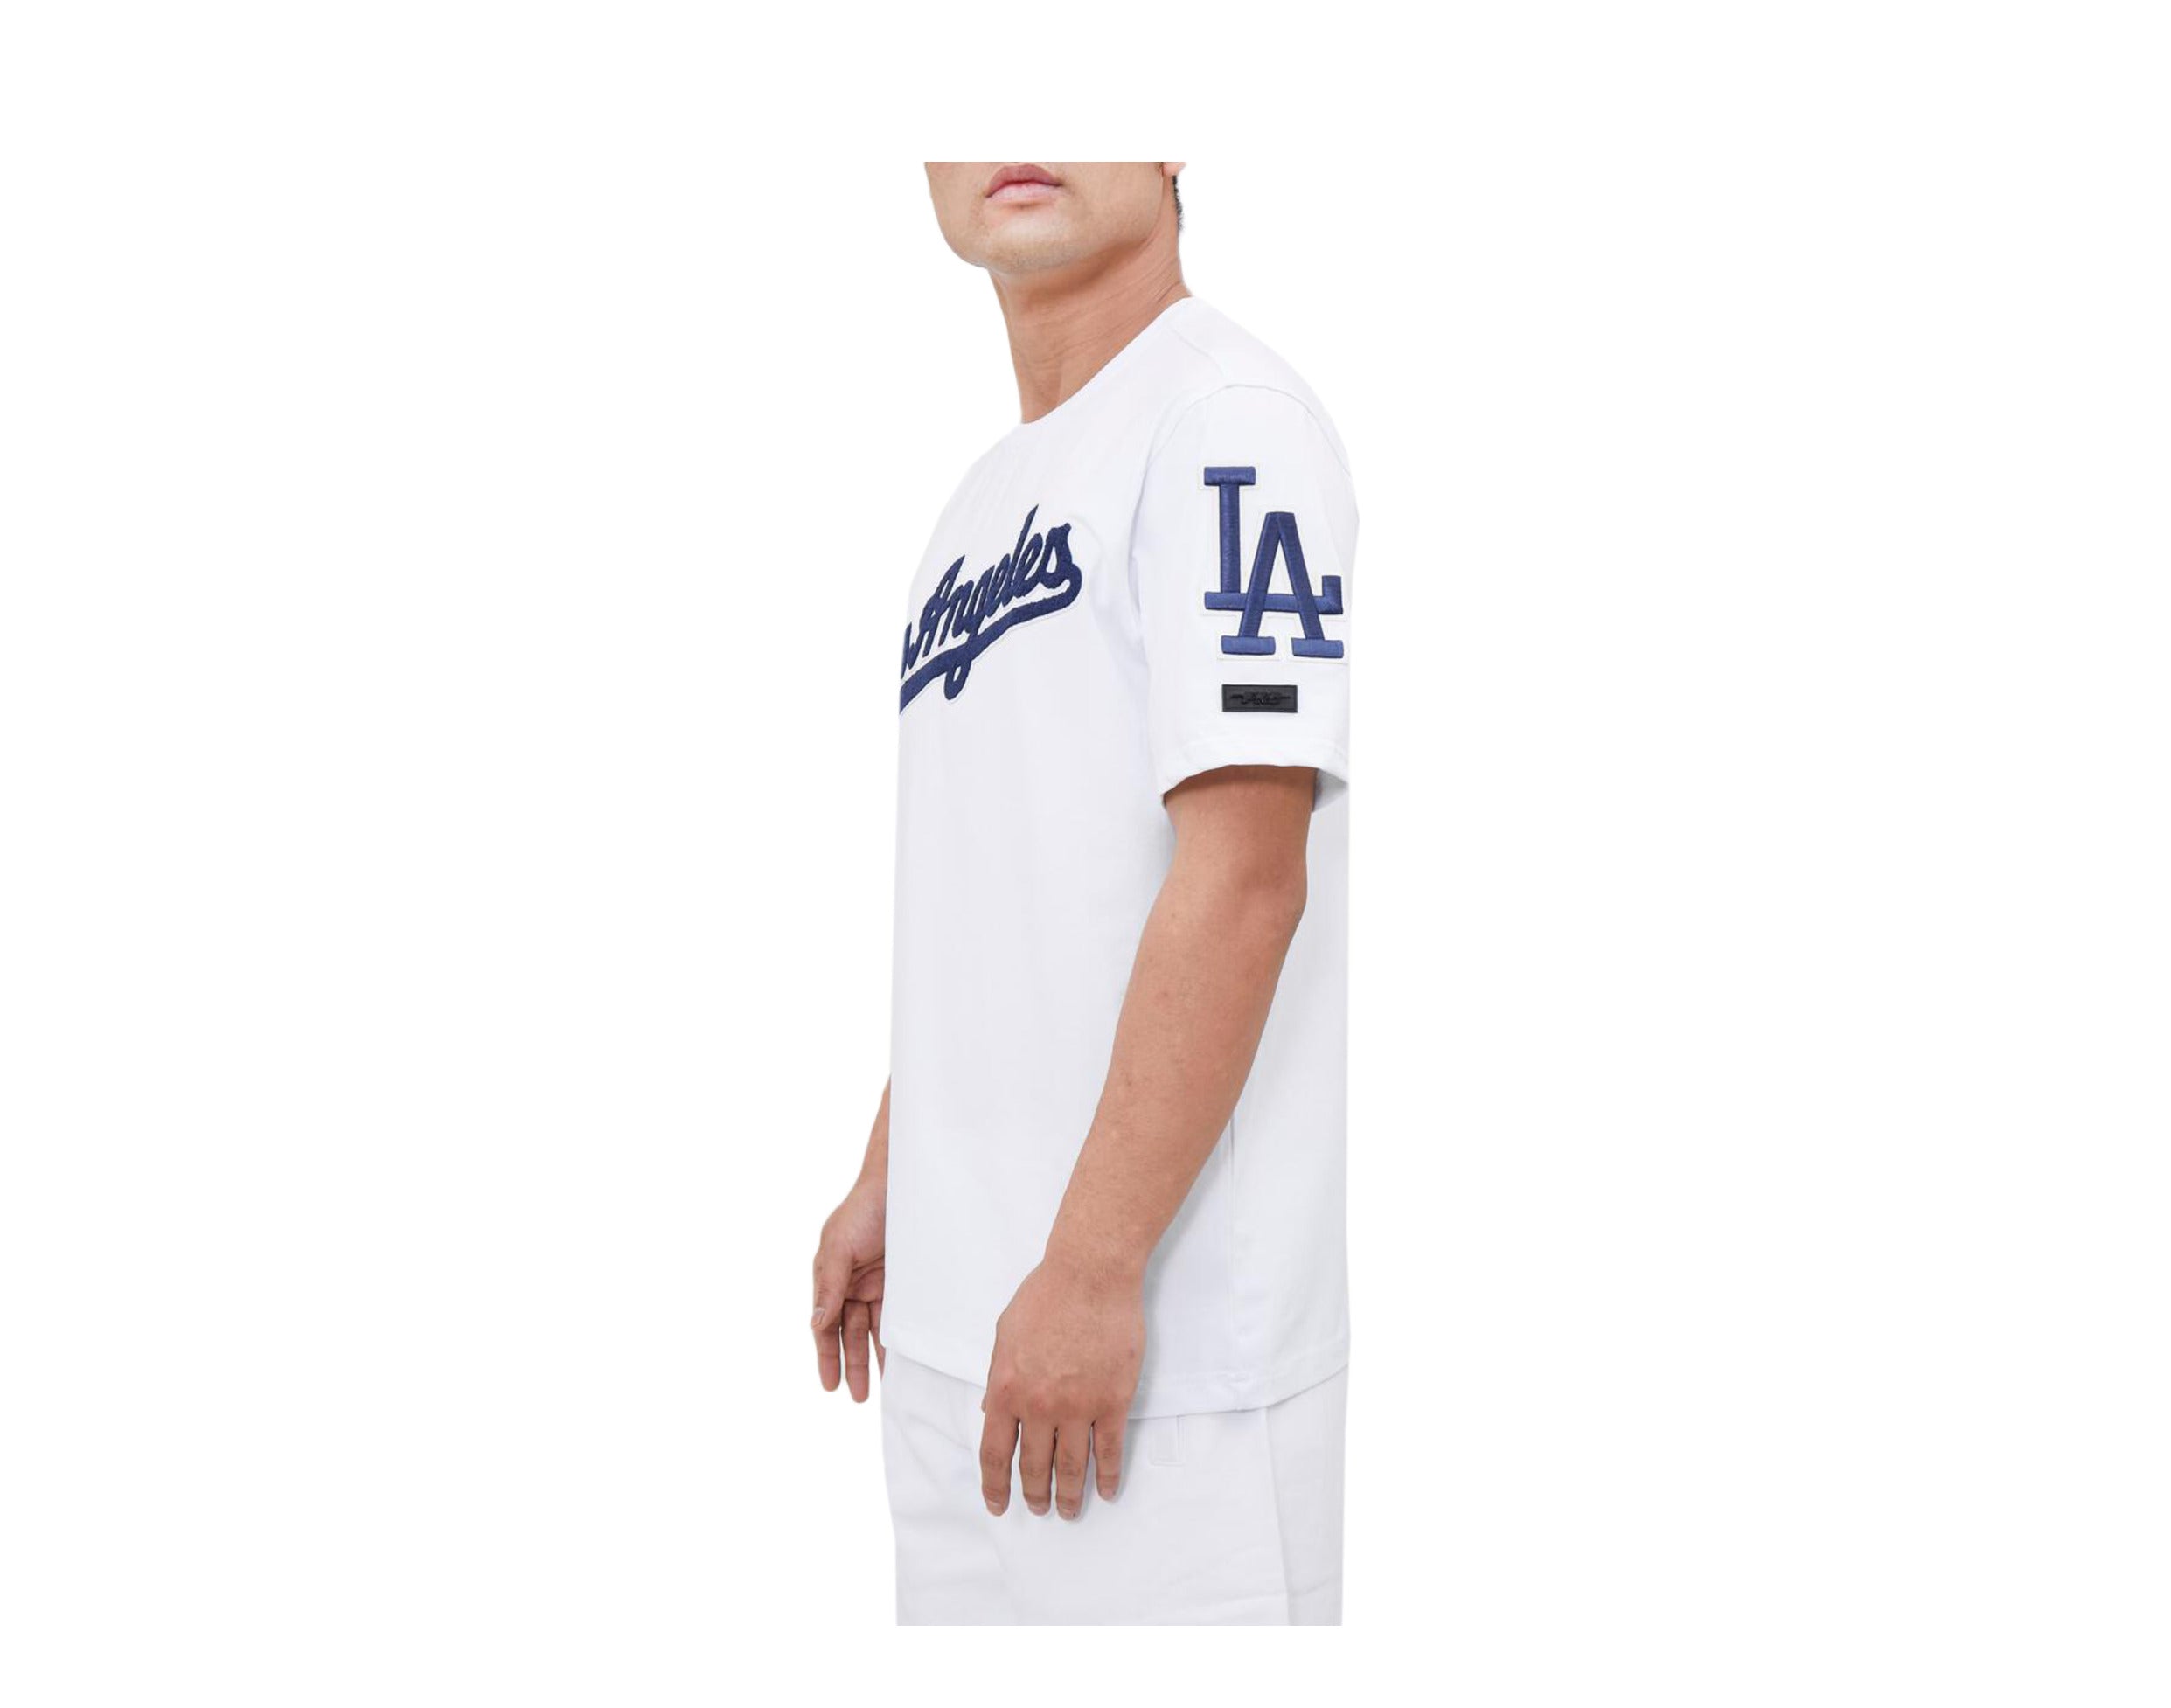 Los Angeles Dodgers T-Shirts in Los Angeles Dodgers Team Shop